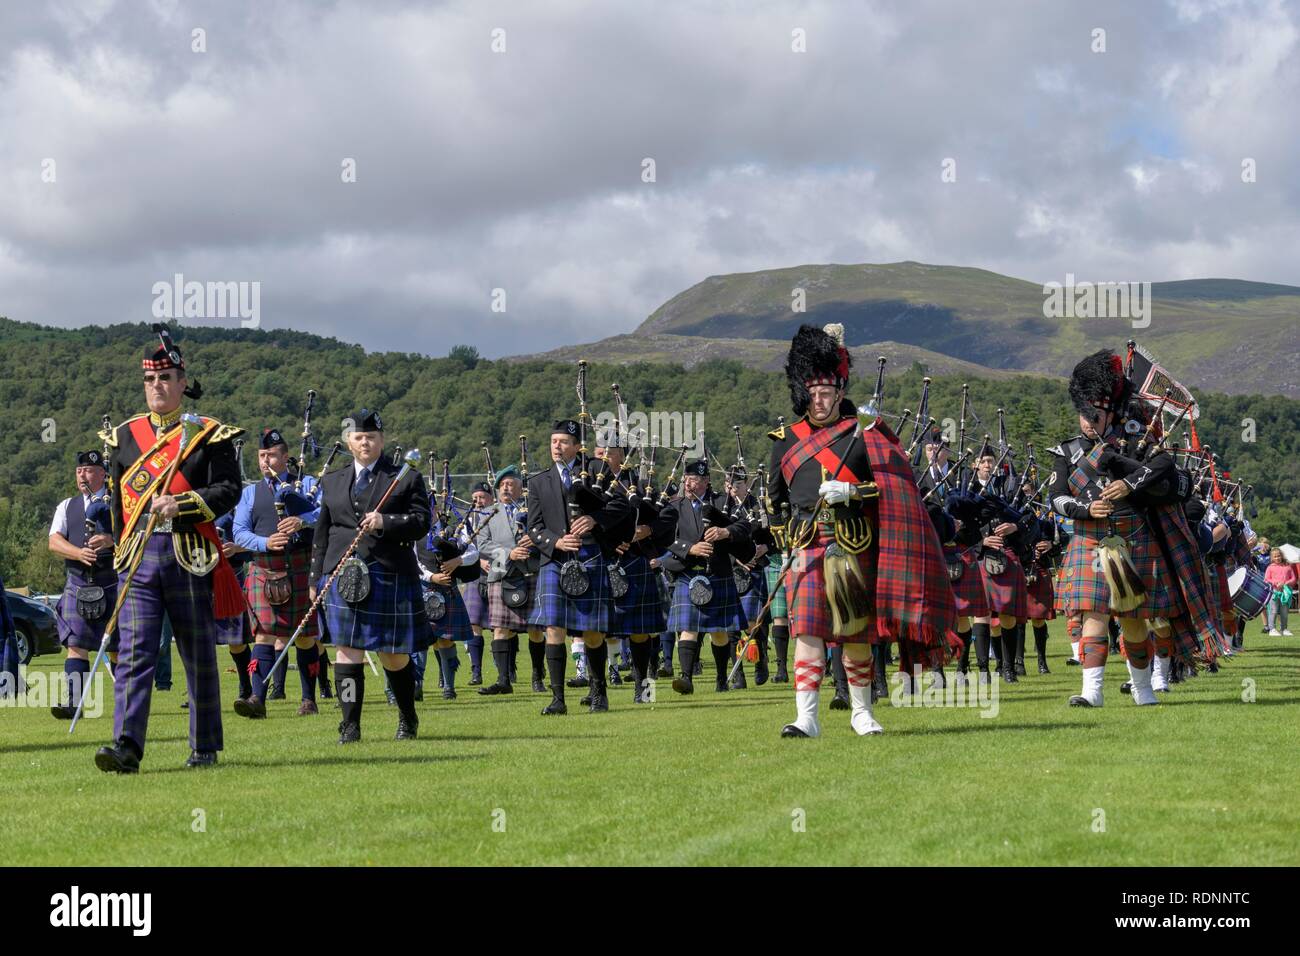 March of the Pipe Bands, Highland Games, Newtonmore, Scotland, United Kingdom Stock Photo